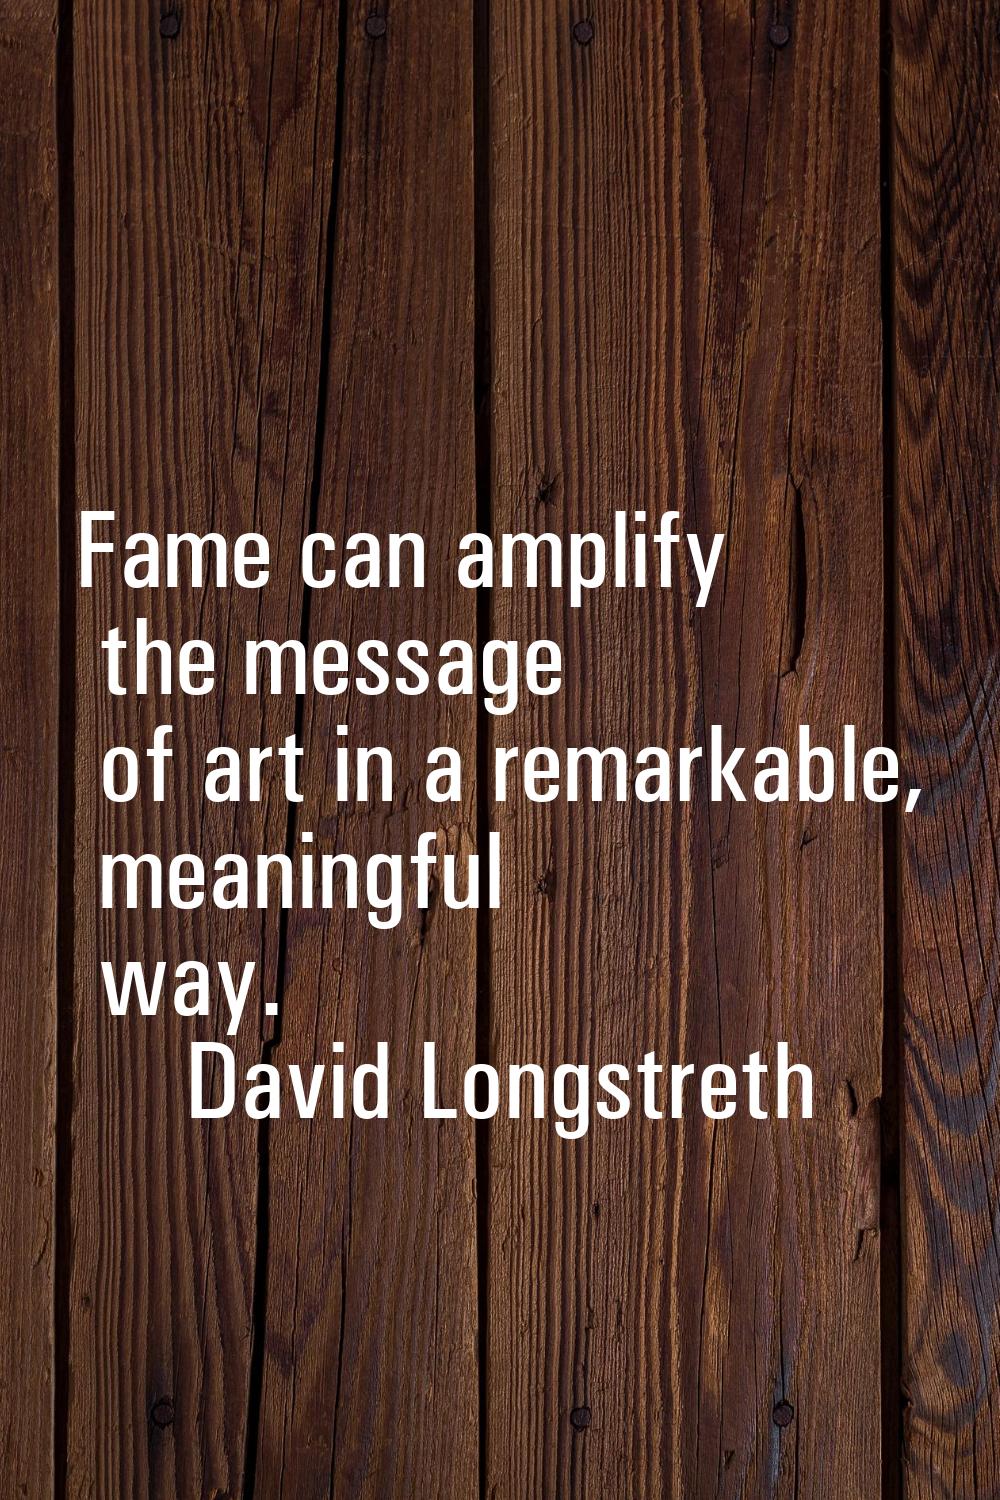 Fame can amplify the message of art in a remarkable, meaningful way.